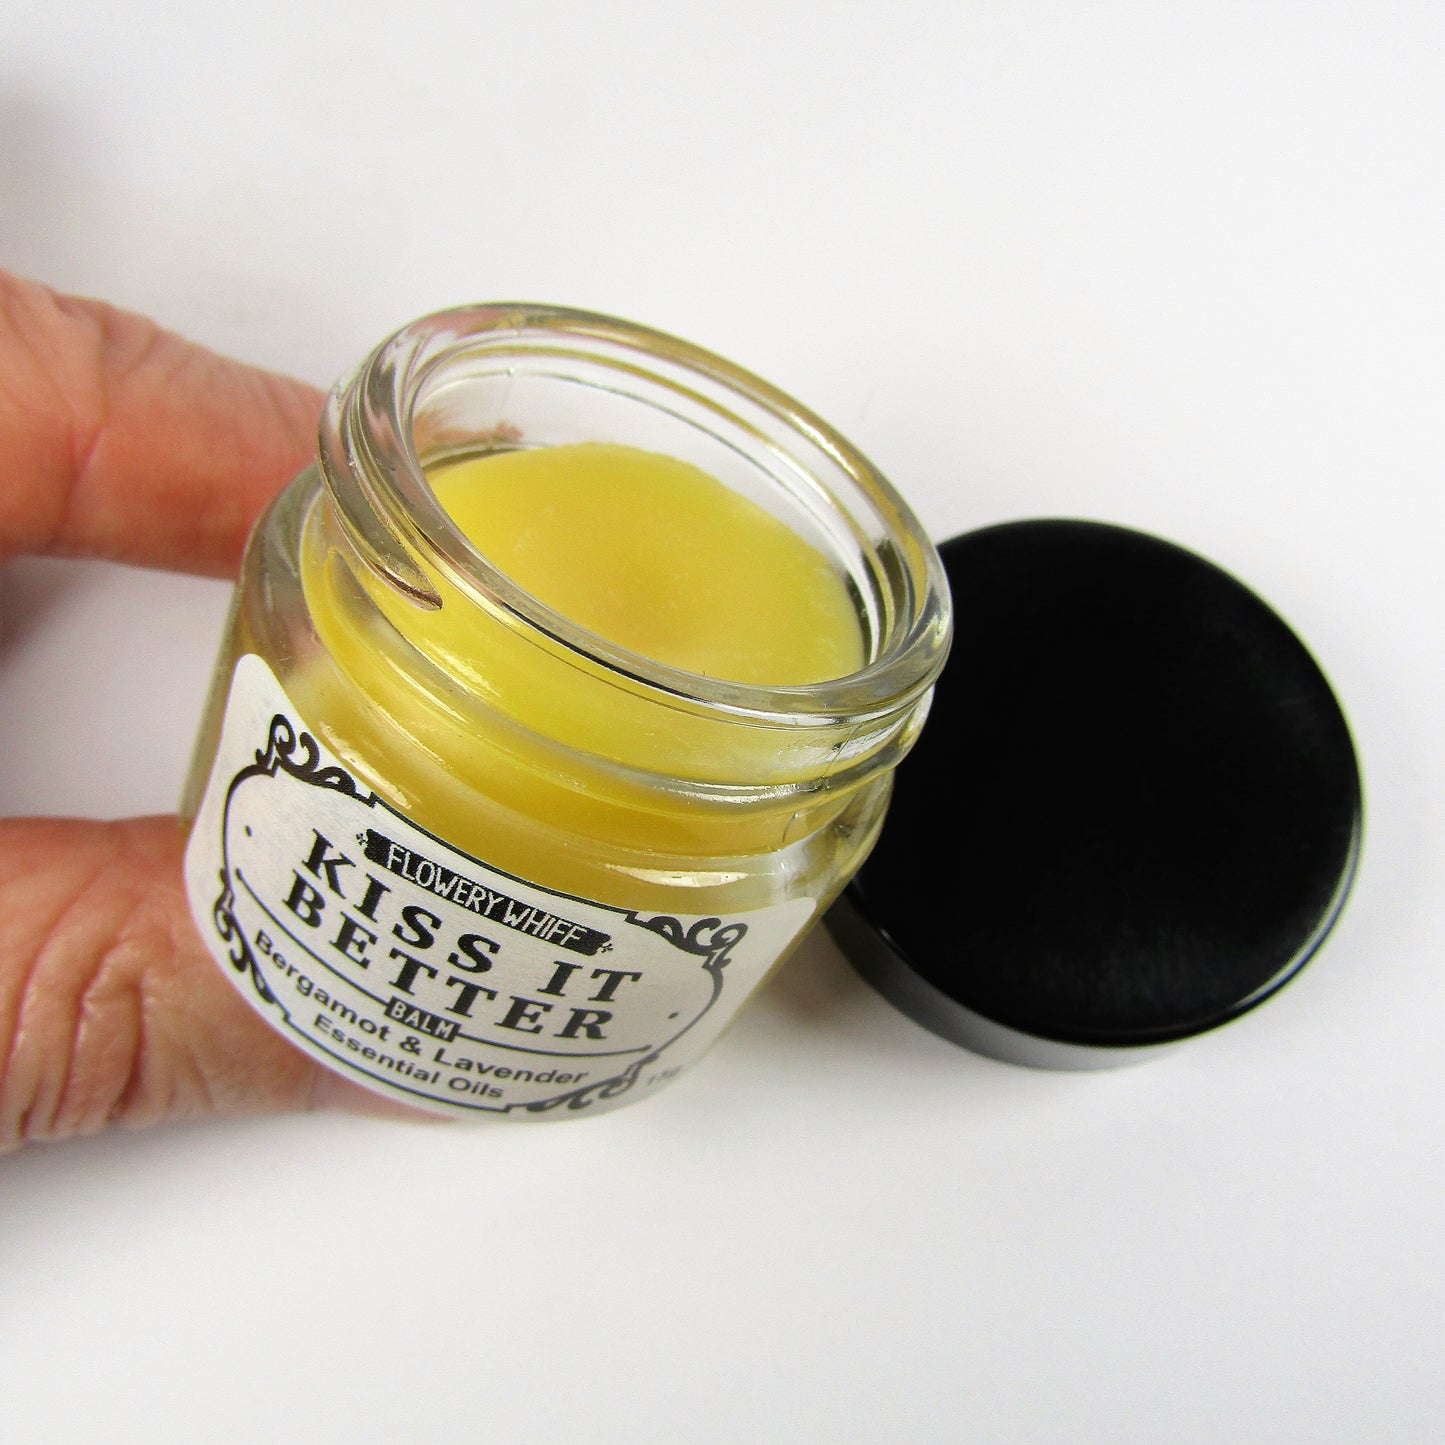 Kiss It Better Soothing Balm